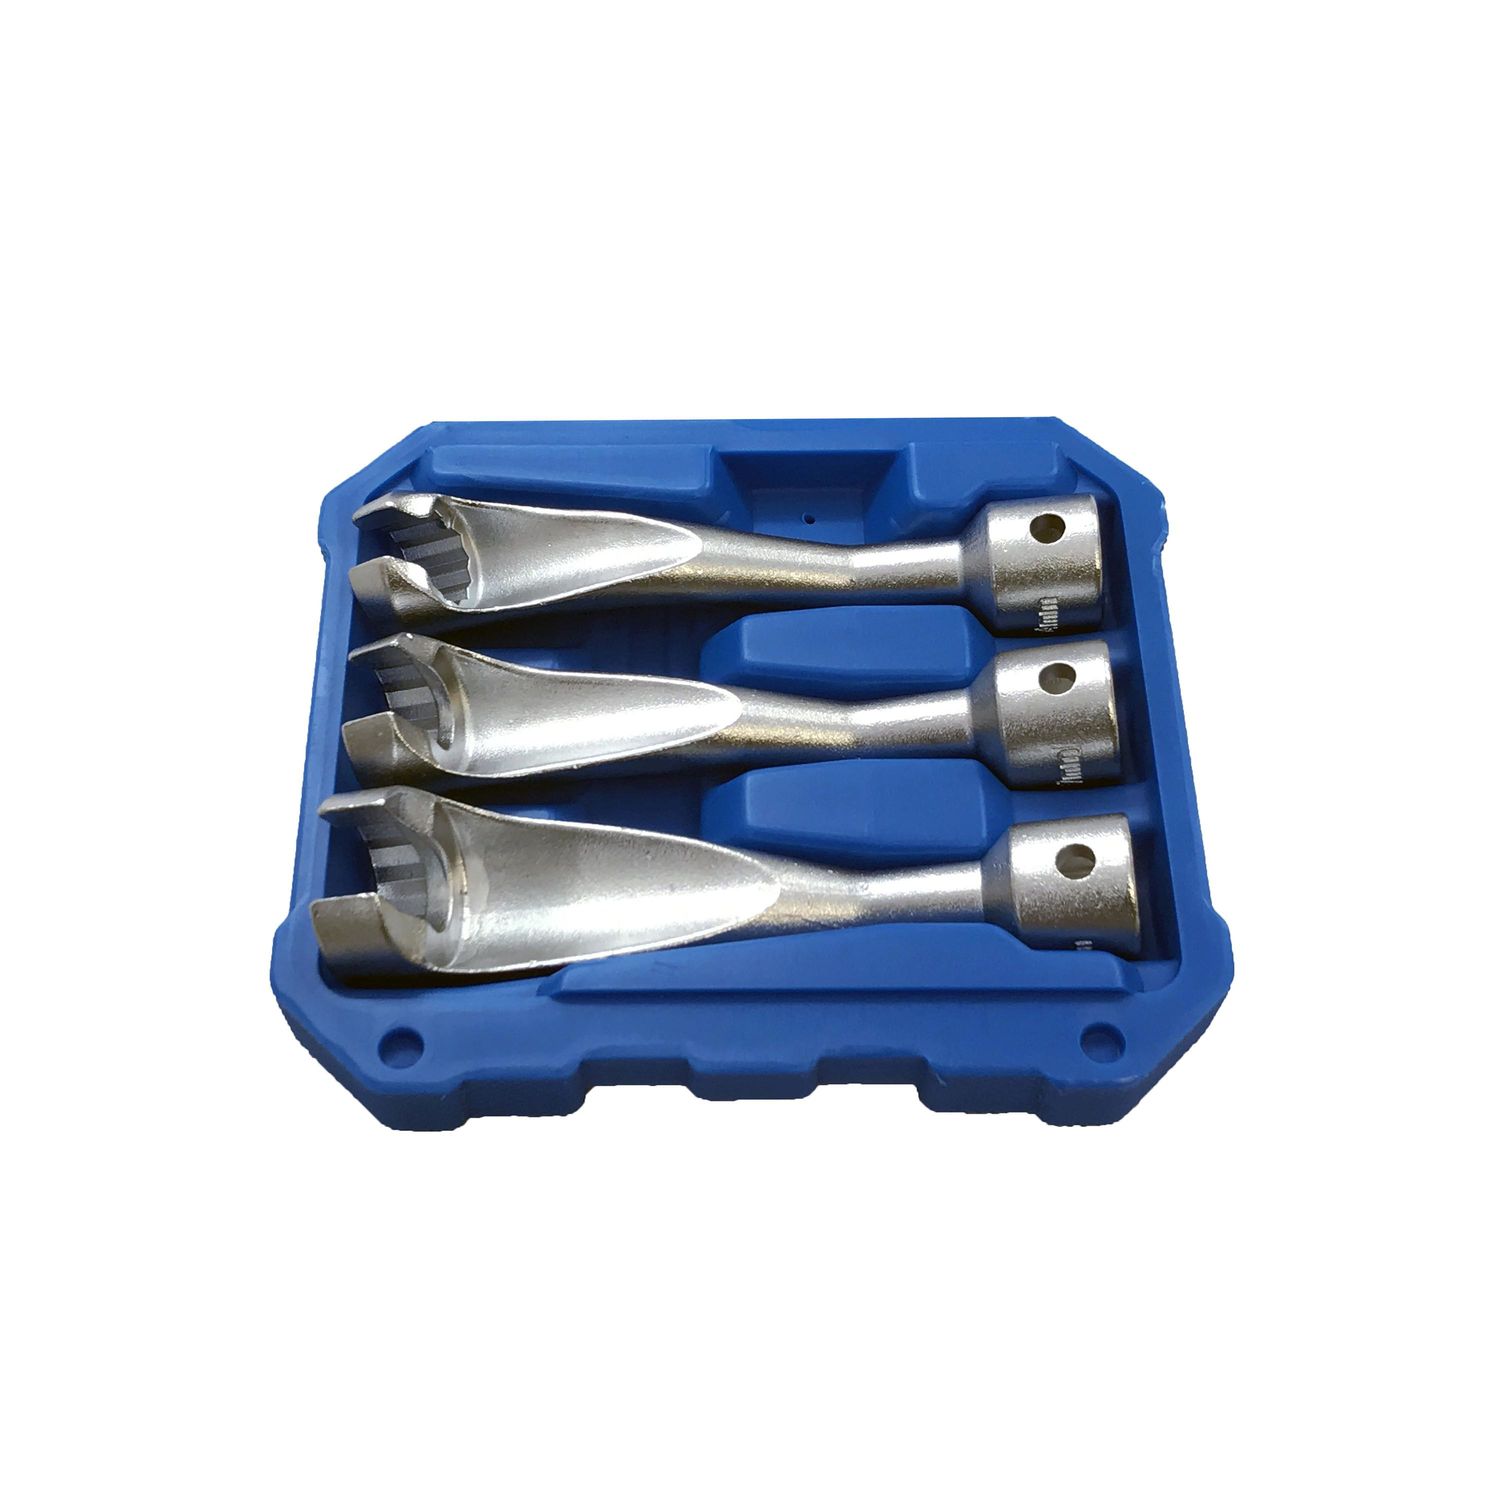 CTA Manufacturing Corporation Injection Wrench Set 3 Piece